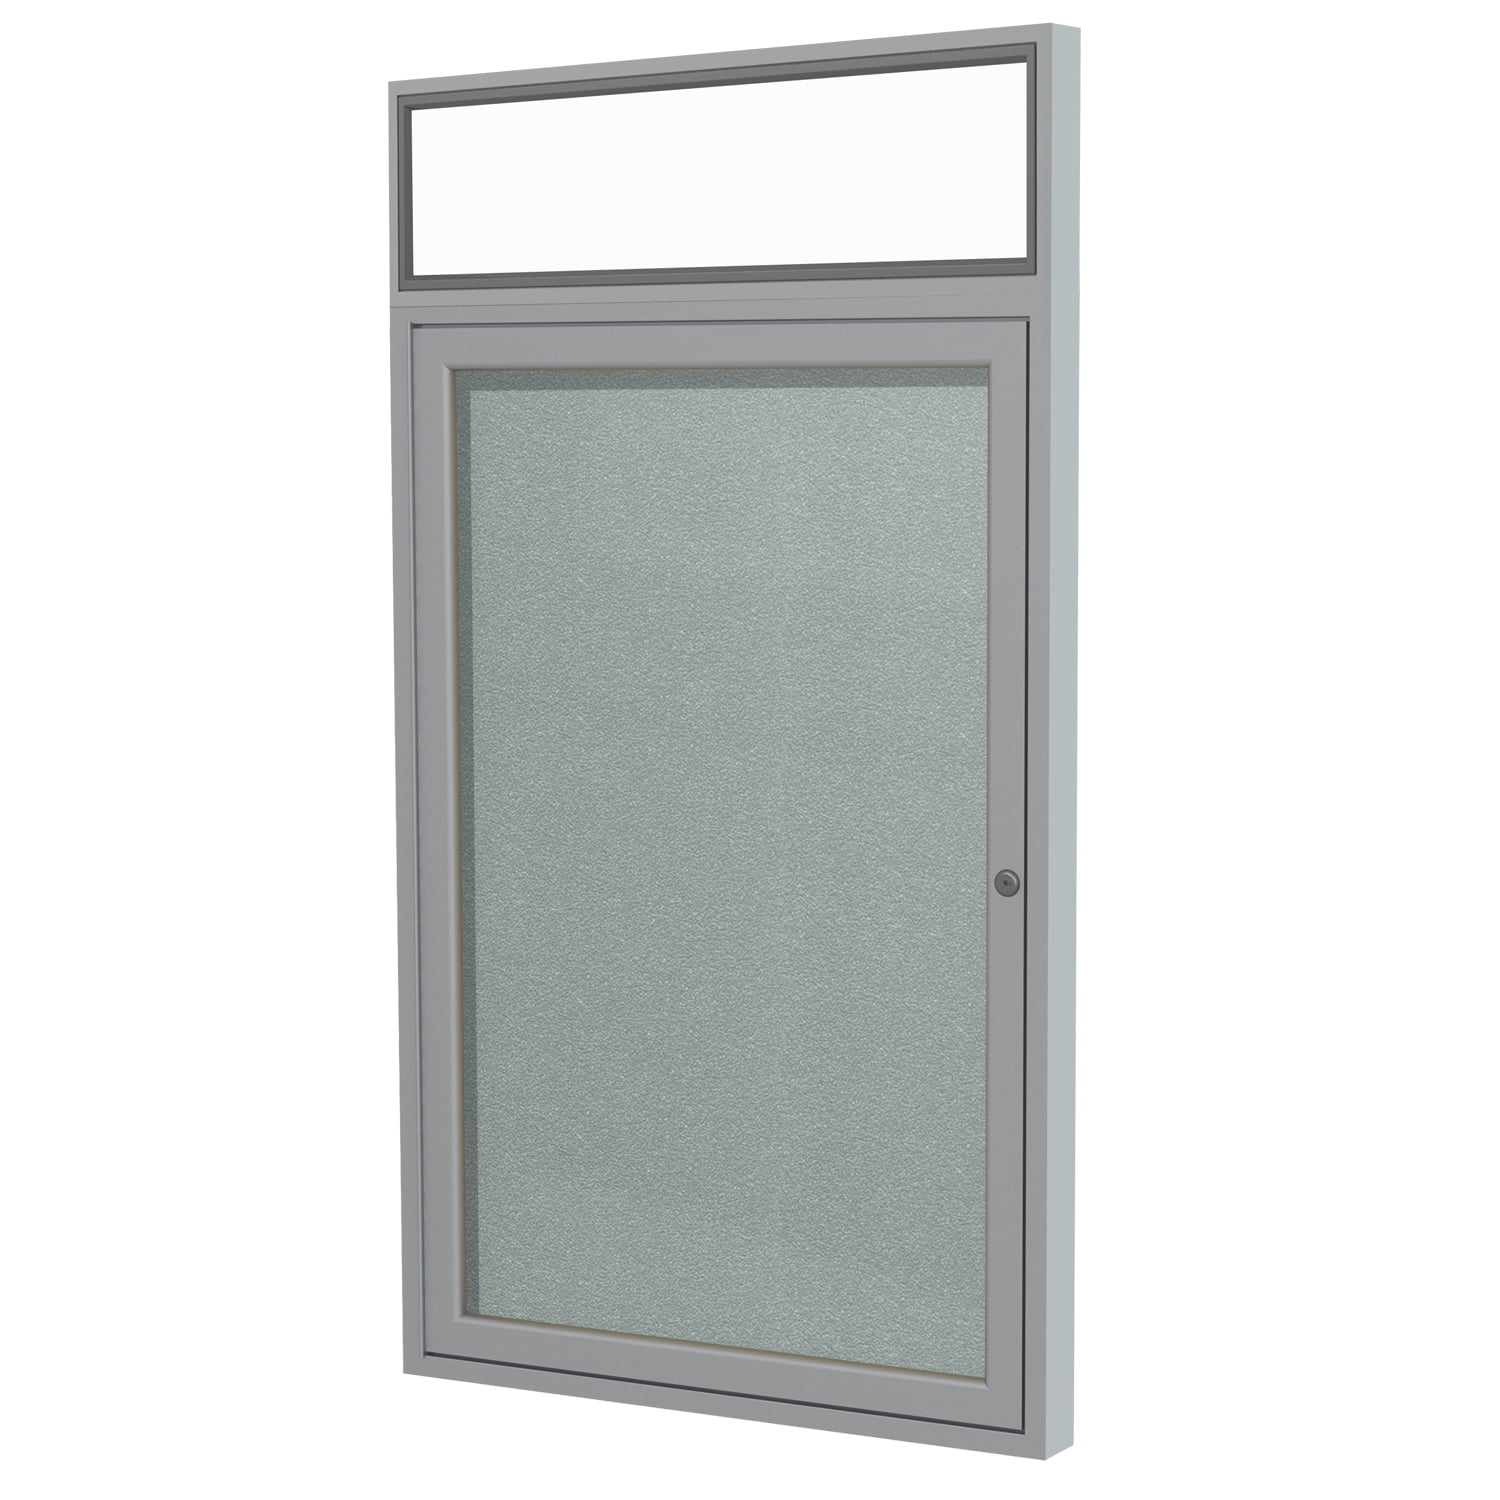 1 Door Outdoor Enclosed Bulletin Board Surface Color 2 H x 16 W Size Satin Mint Frame Finish 